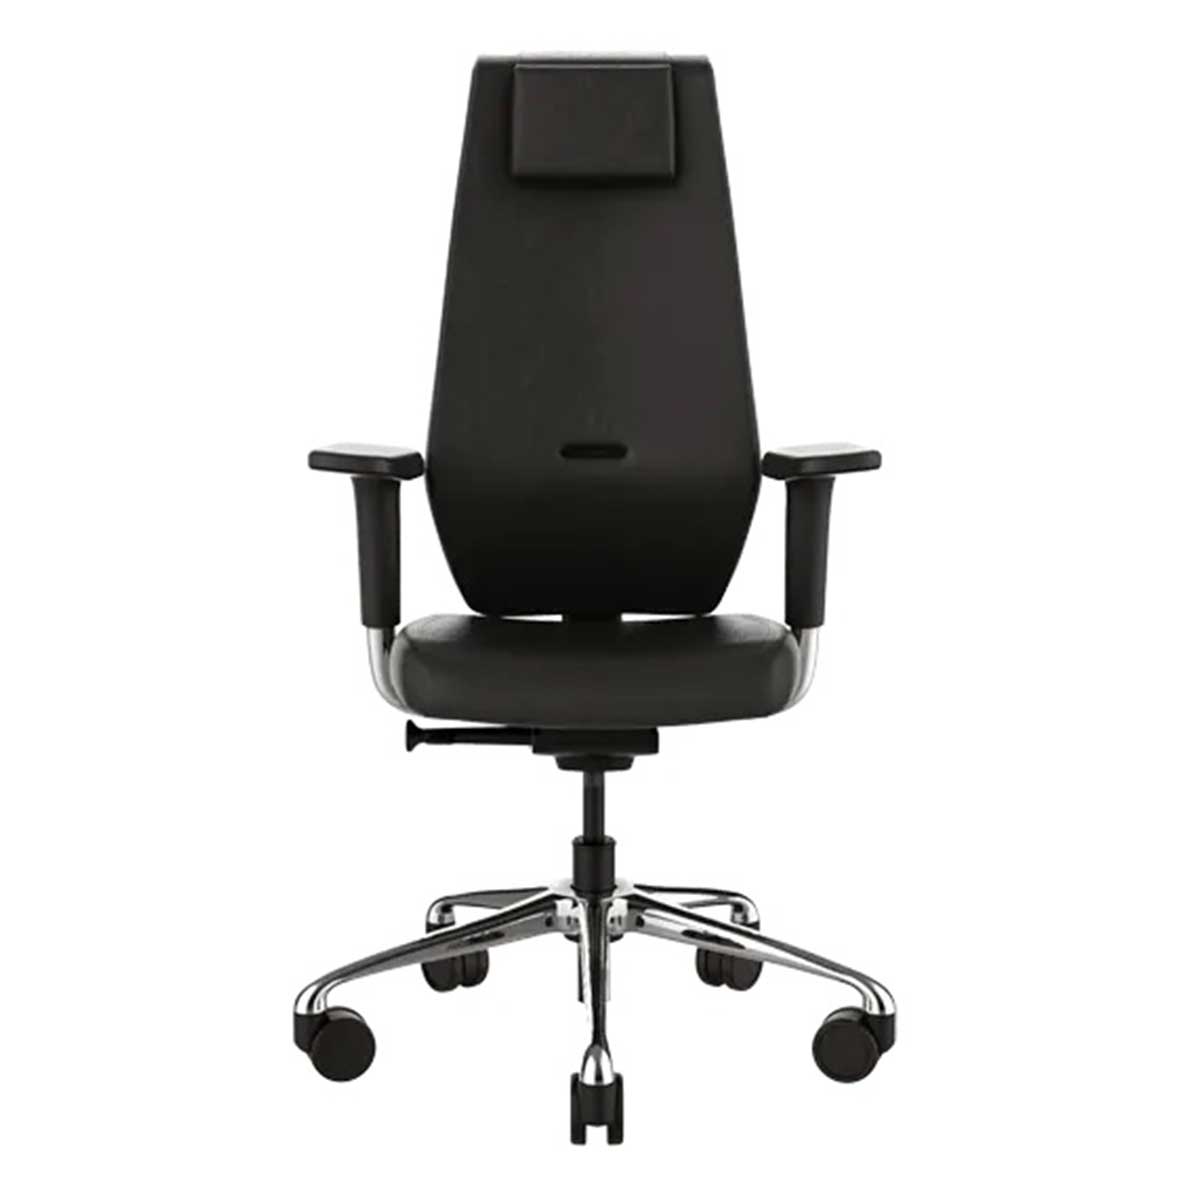 Mesh Executive Chair Manufacturers, Suppliers in Noida Sector 78